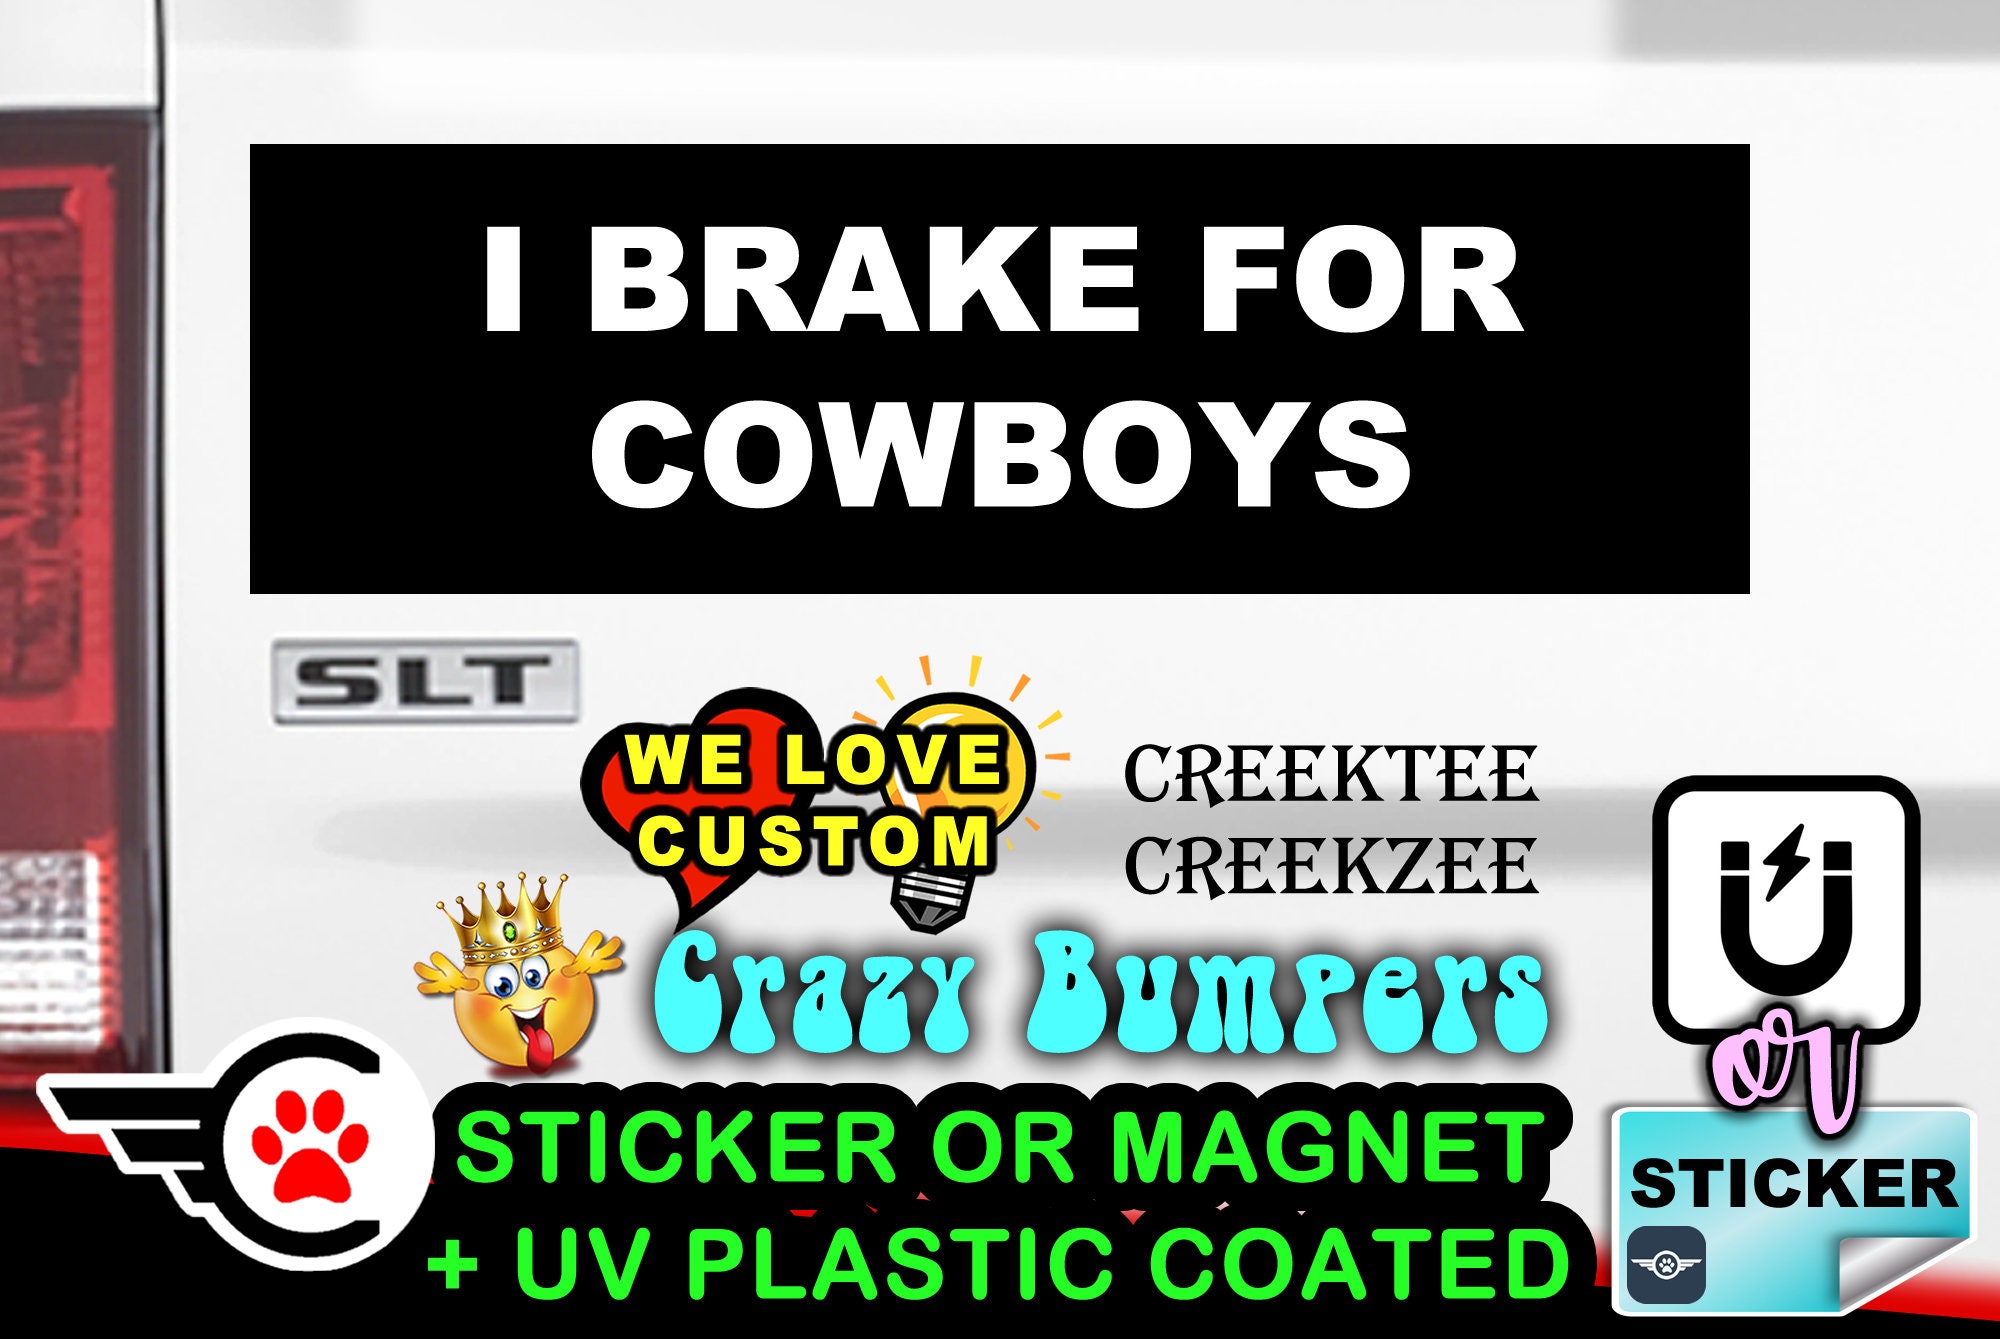 I Brake For Cowboys Funny Bumper Sticker or Magnet in various sizes Hiqh Quality UV Laminate Coating